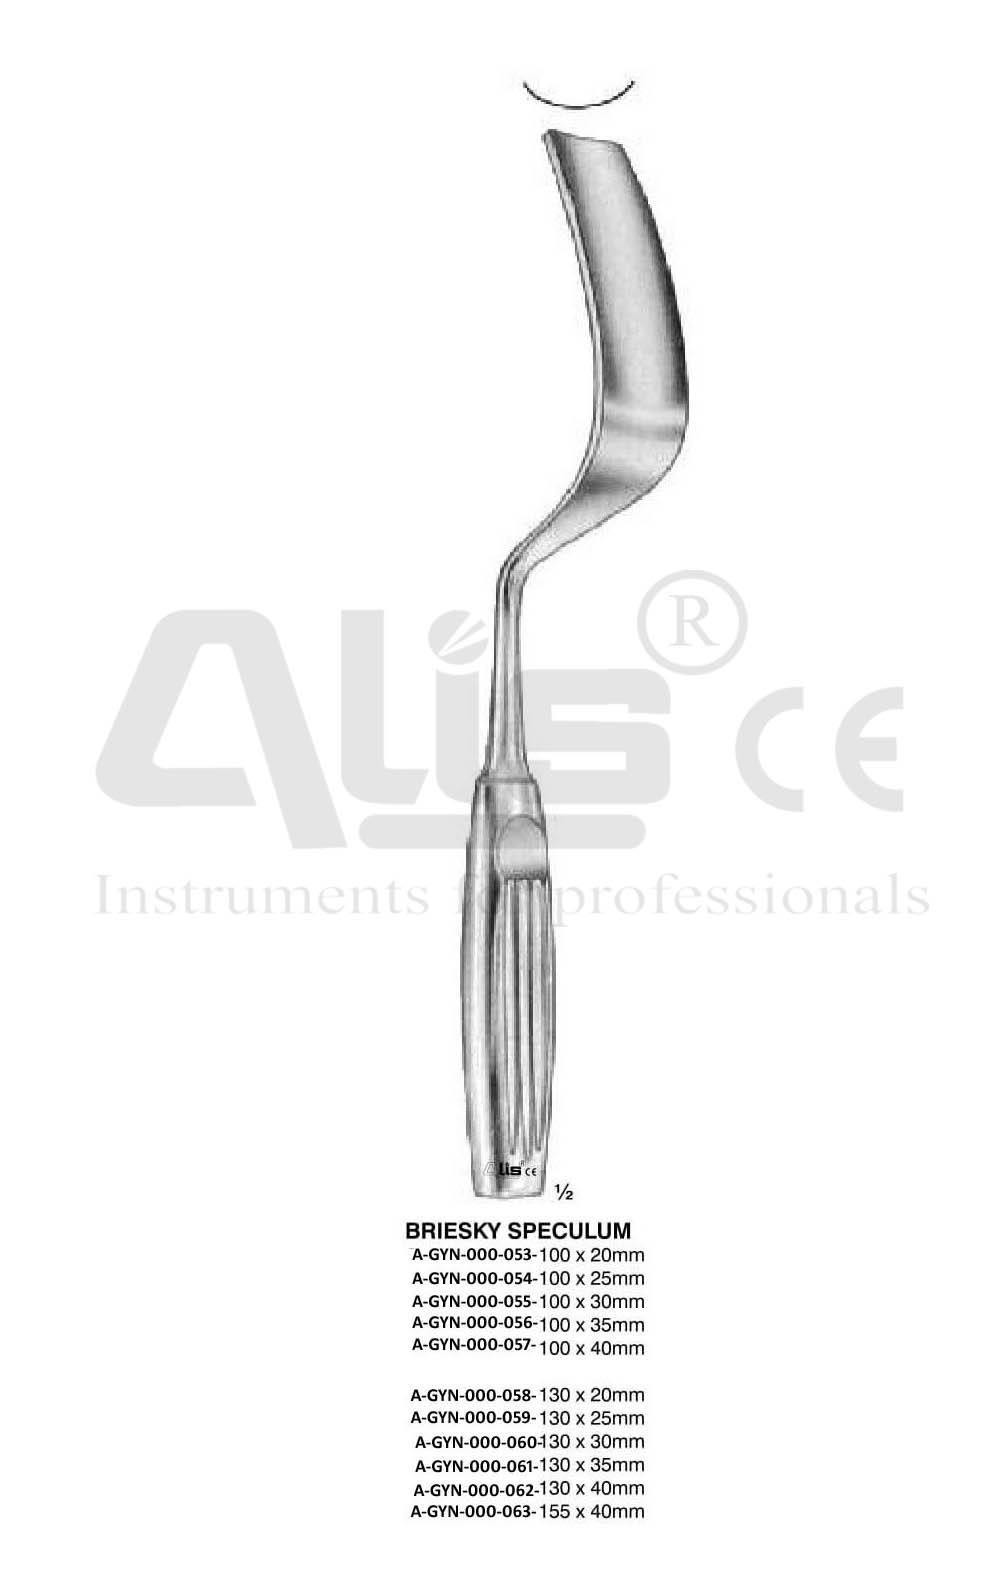 Briesky Speculum surgical instruments